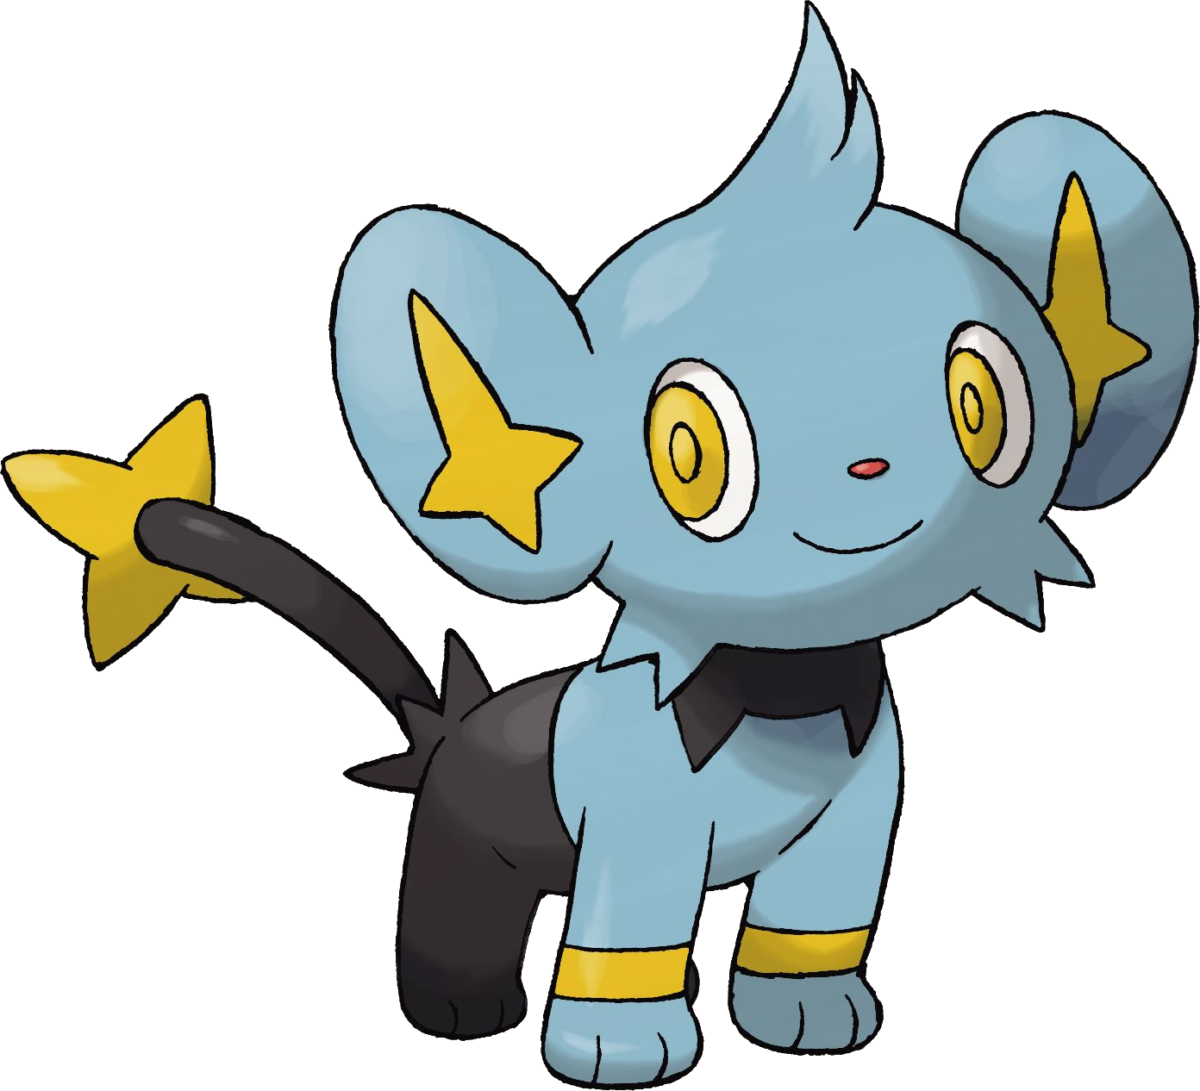 Shinx screenshots, images and pictures – Giant Bomb